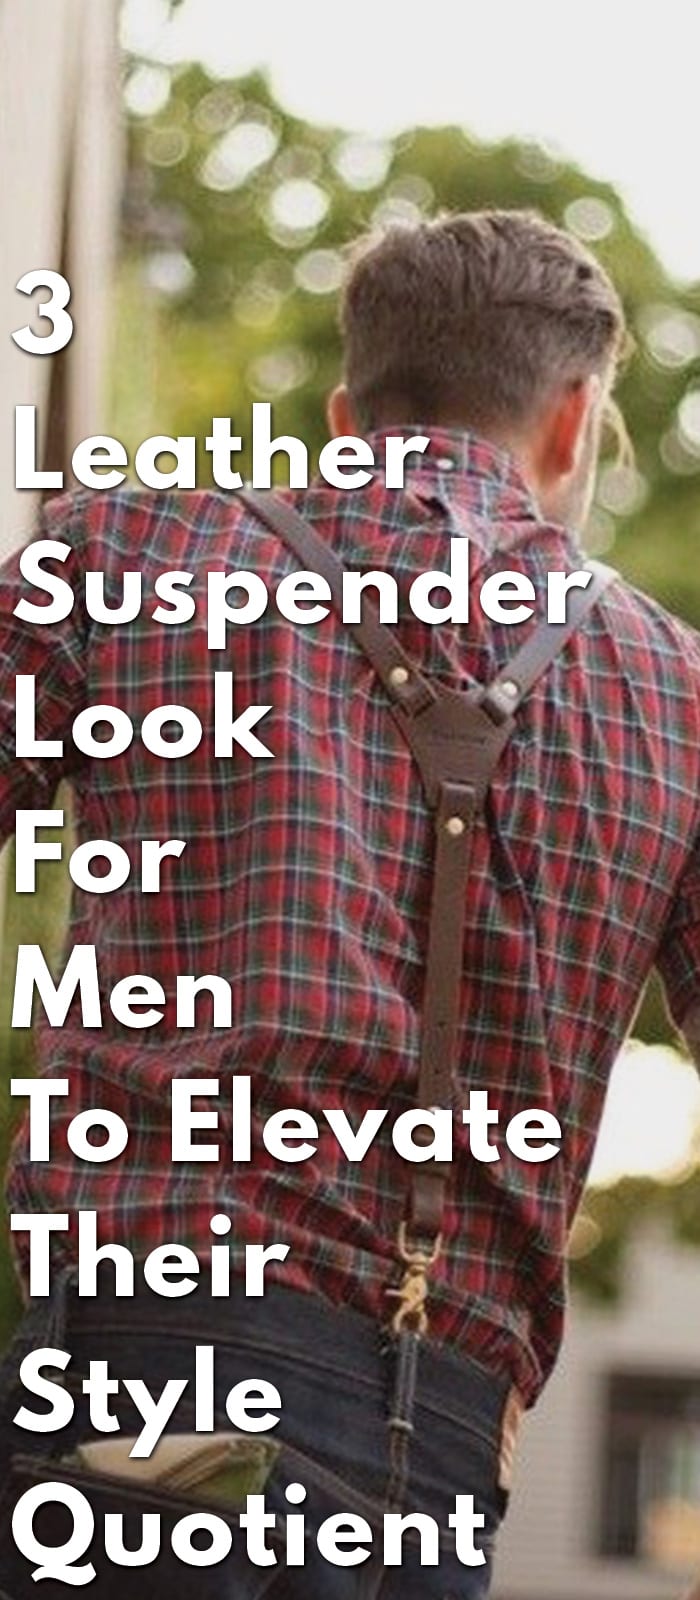 3-Leather-Suspender-Look-For-Men-To-Elevate-Their-Style-Quotient